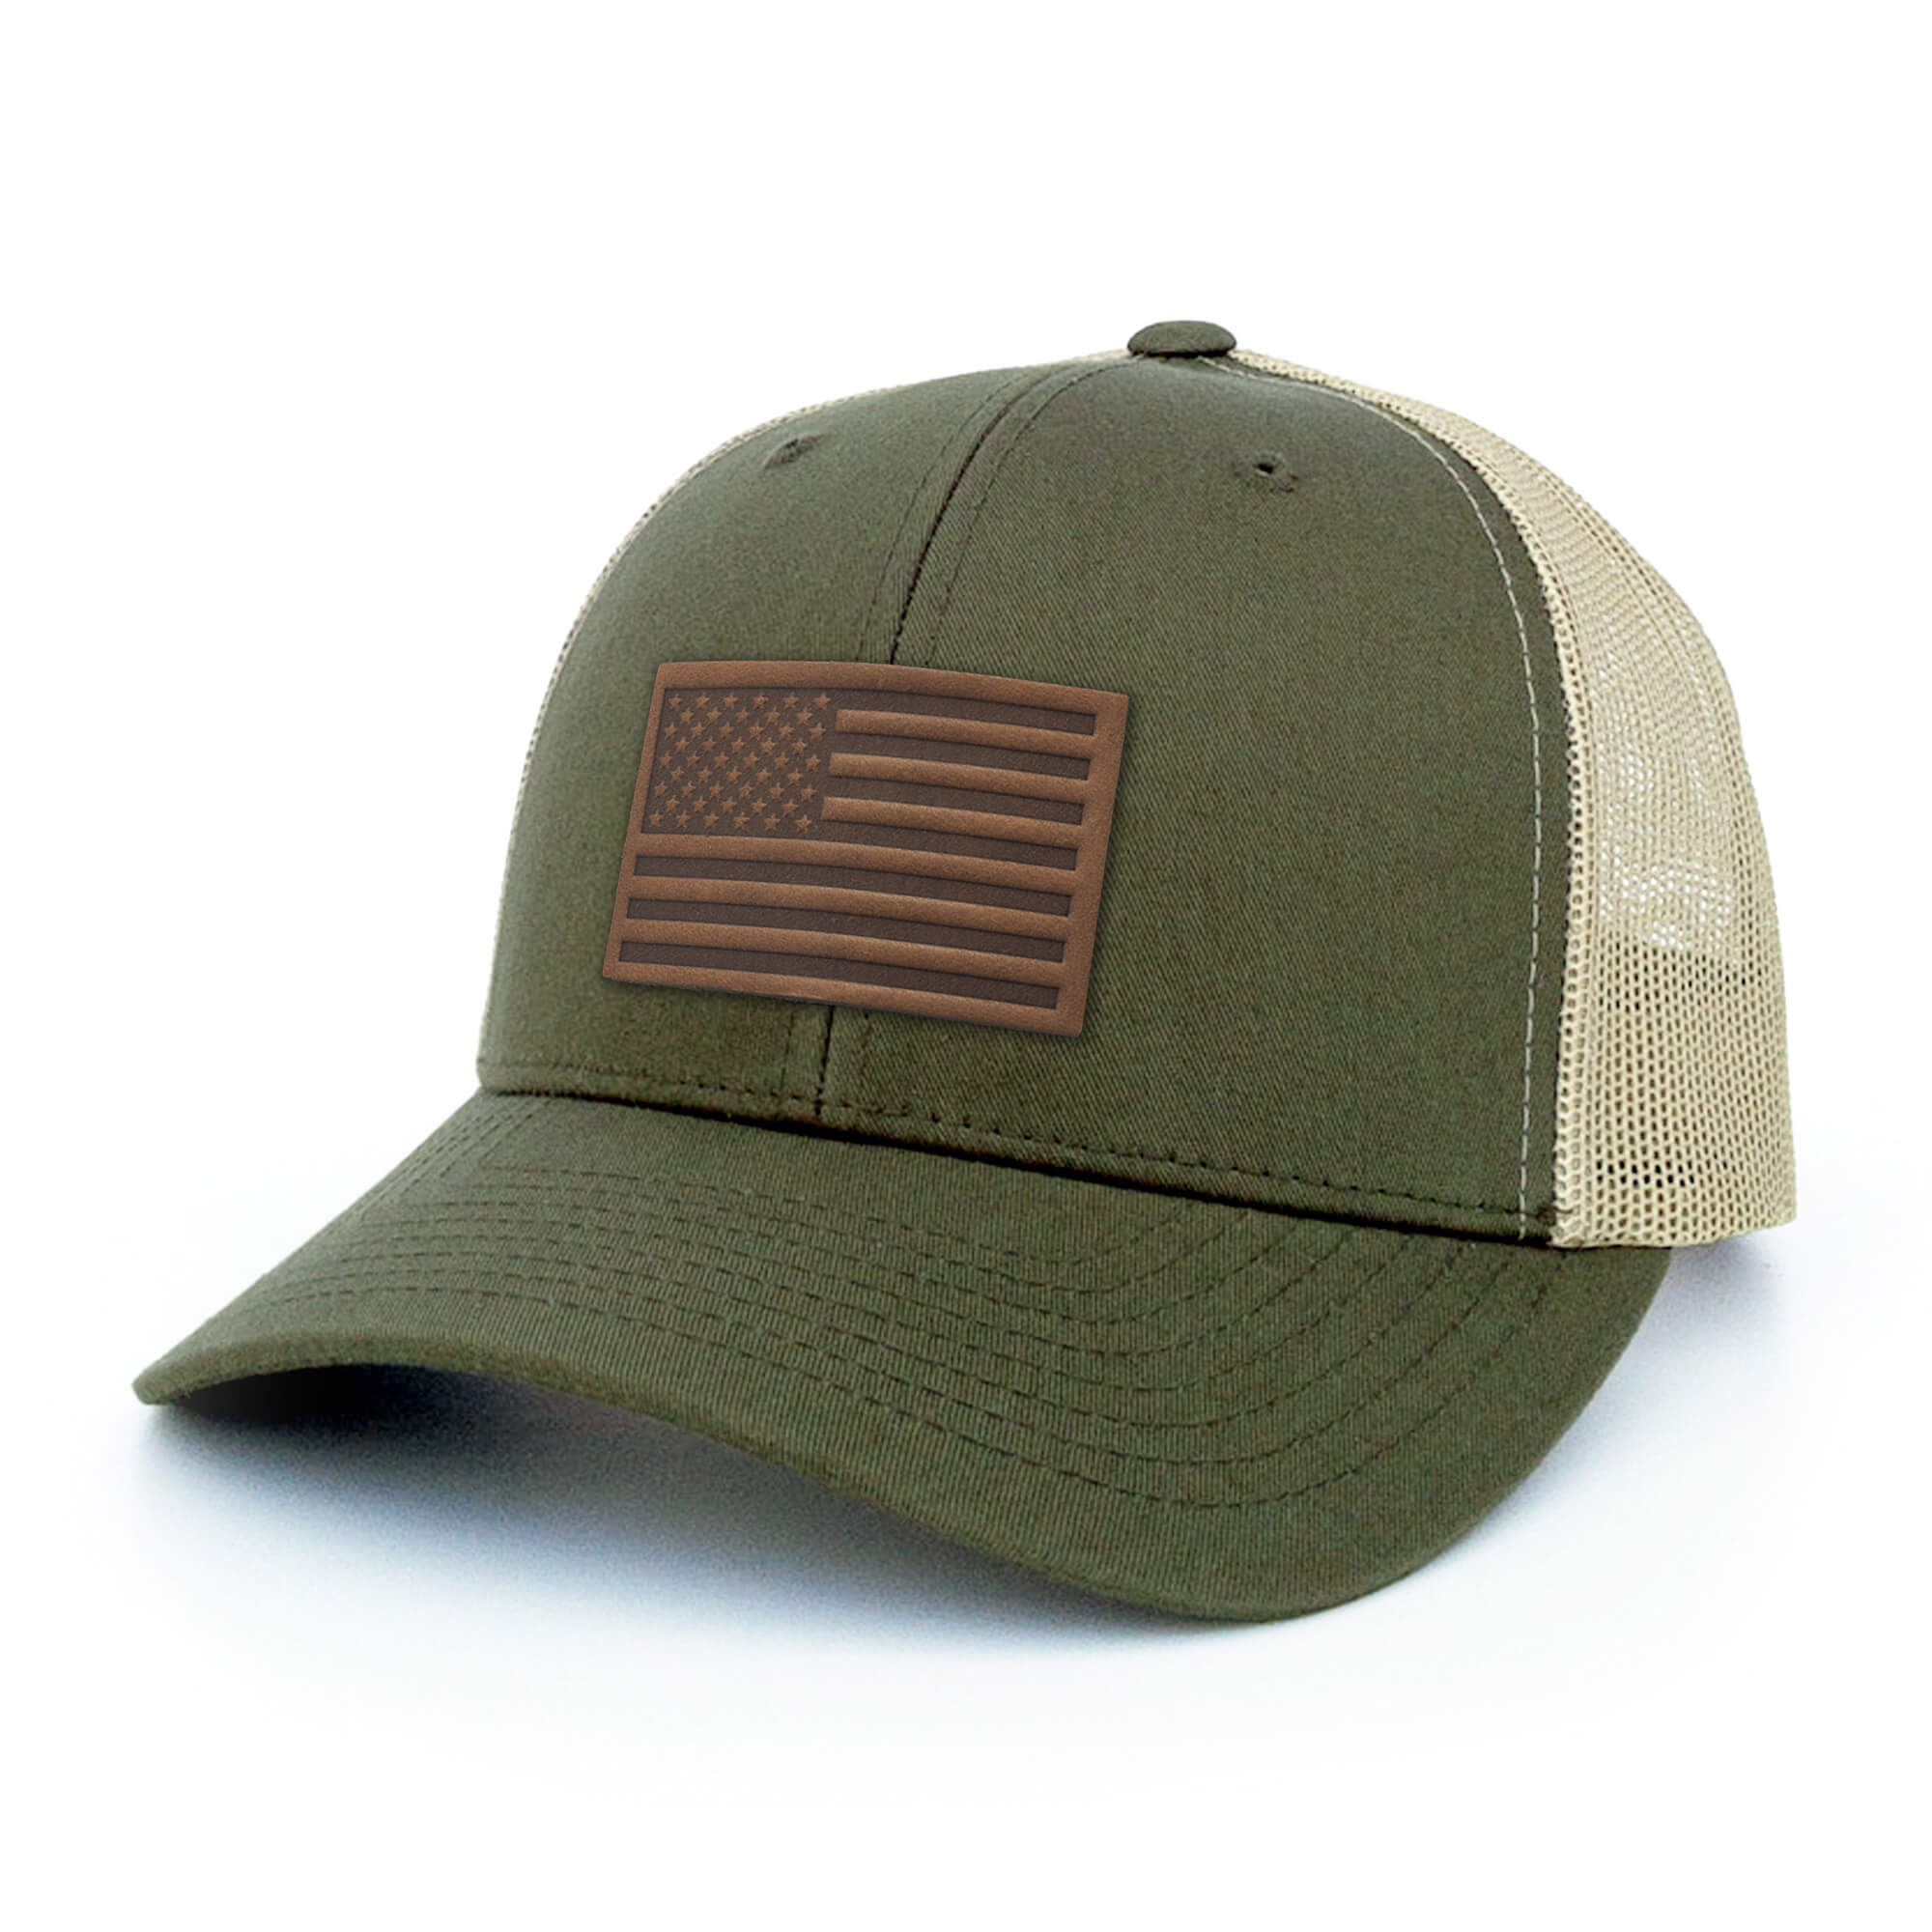 Moss Green and khaki trucker hat with full-grain leather patch of USA Flag | BLACK-003-012, CHARC-003-012, NAVY-003-012, HGREY-003-012, MOSS-003-012, BROWN-003-012